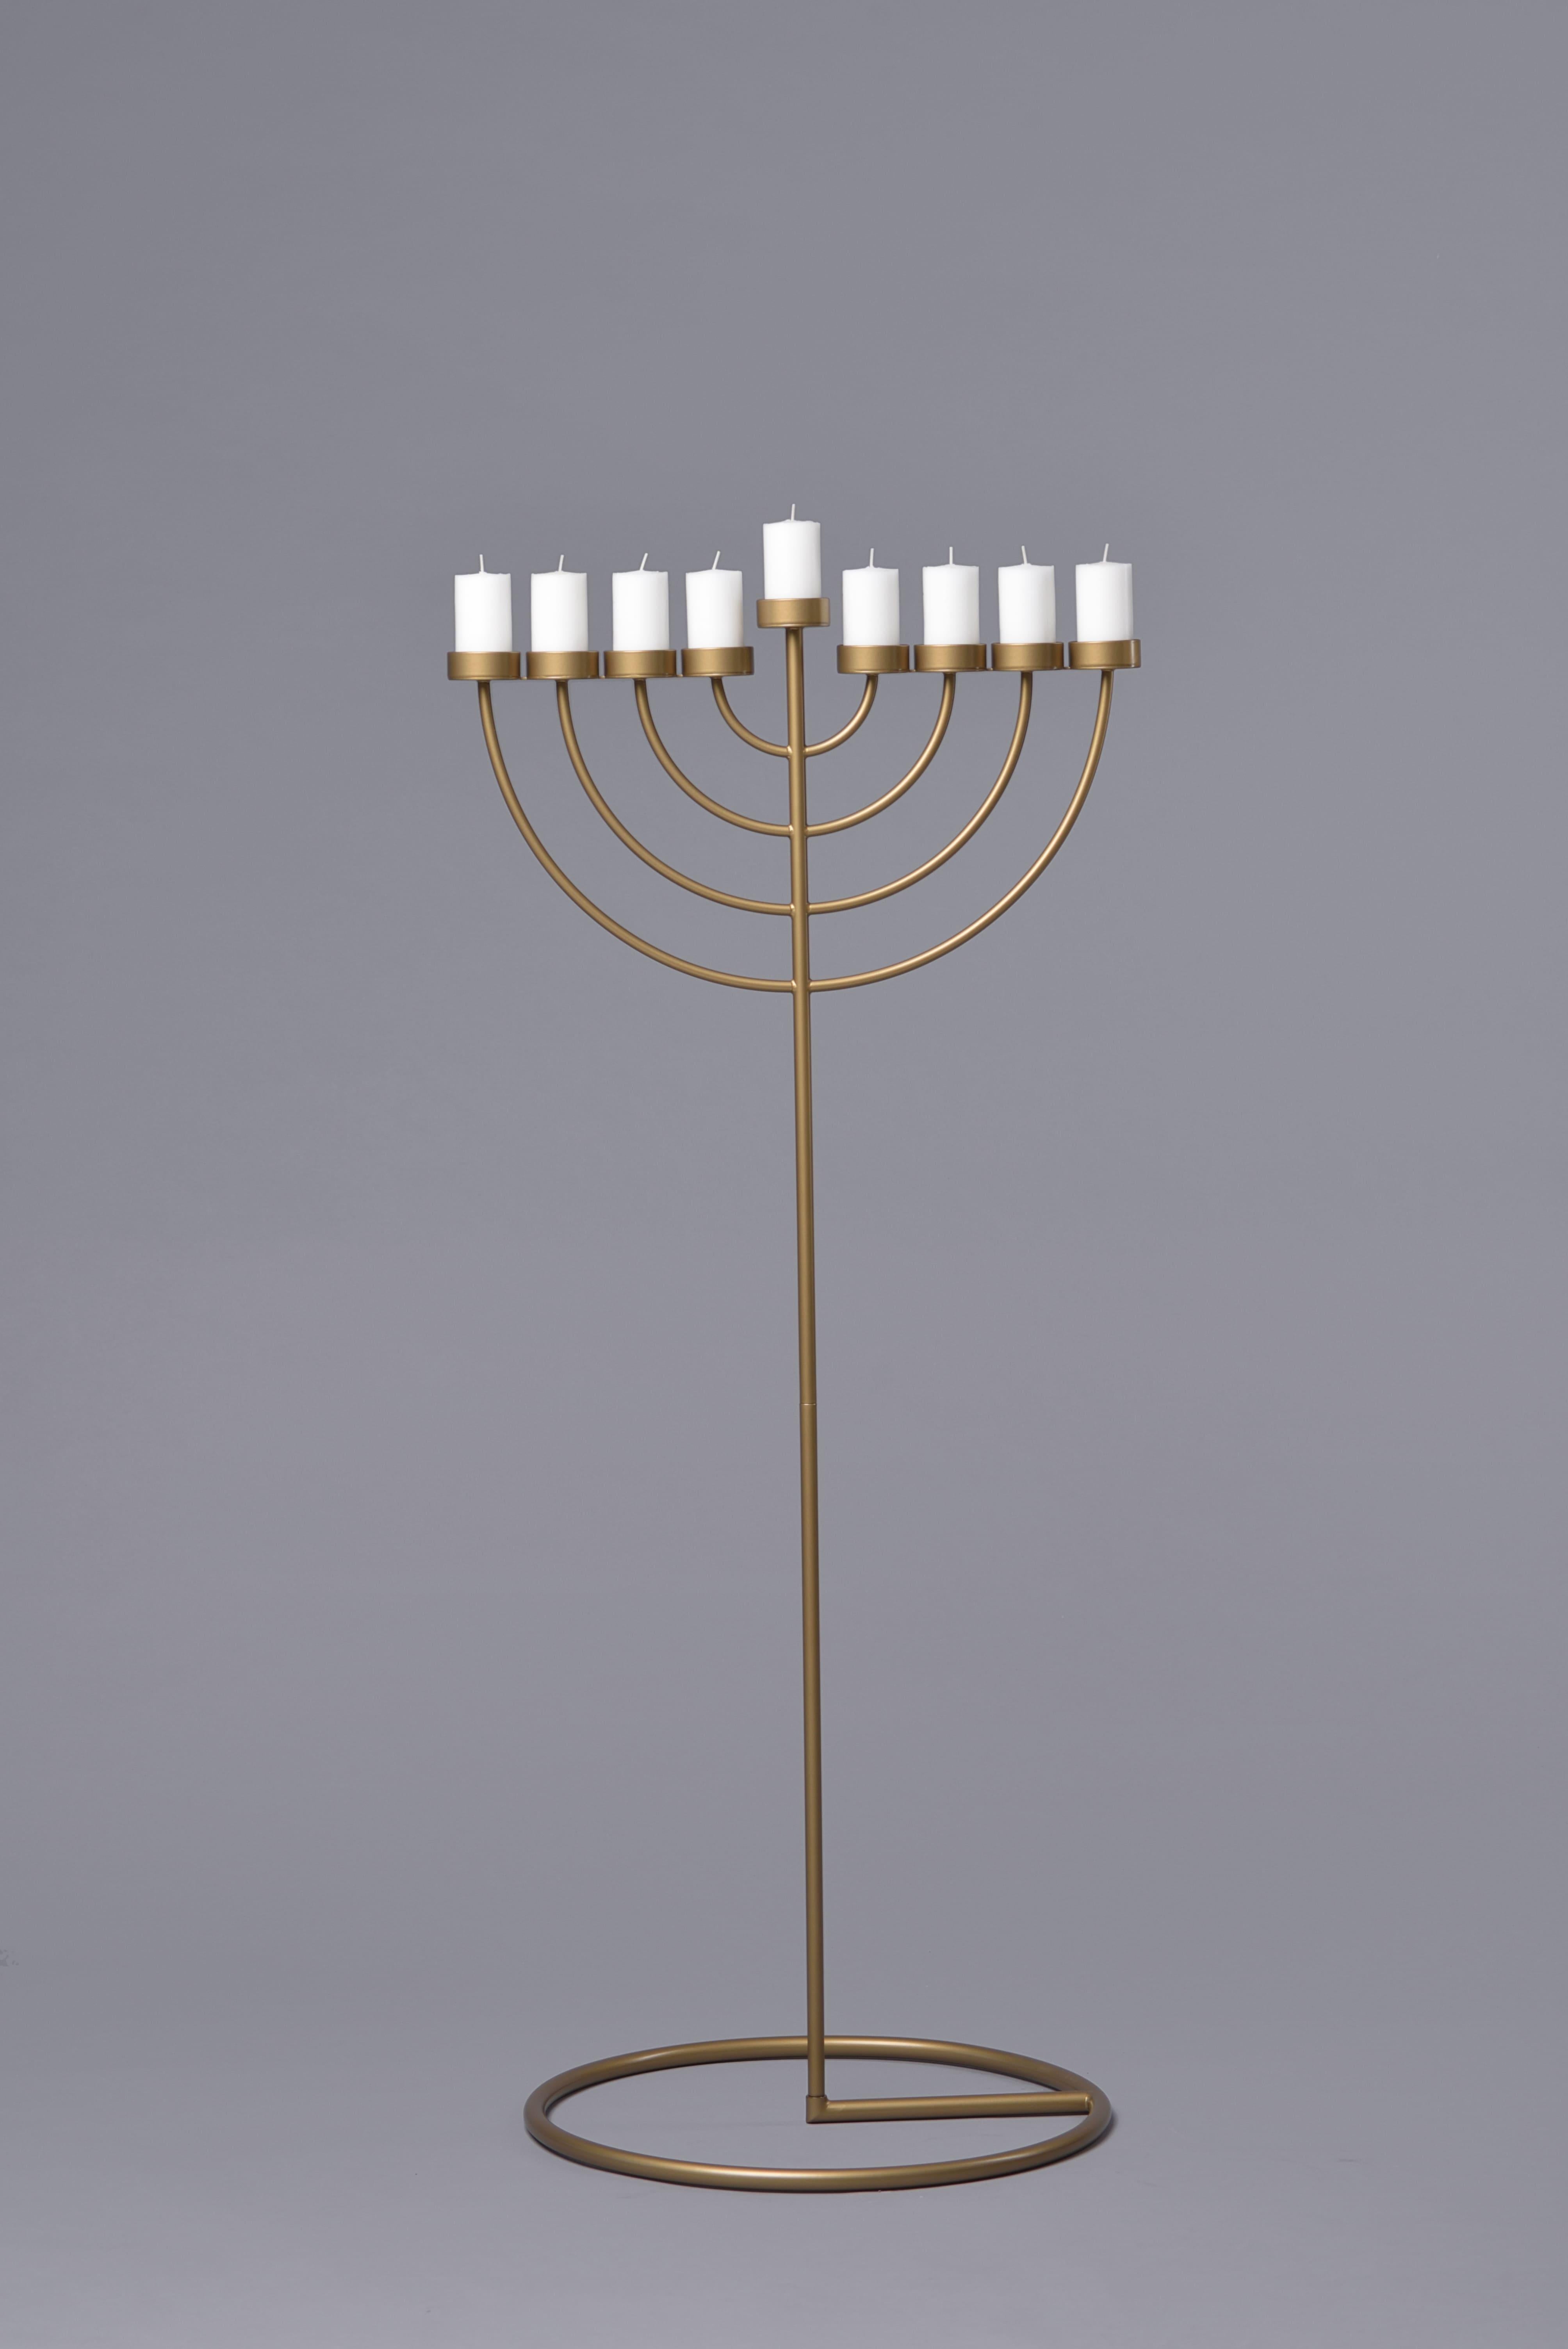 Minimalist RADIUS Menorah, floor standing candleholders (130cm) by oitoproducts For Sale